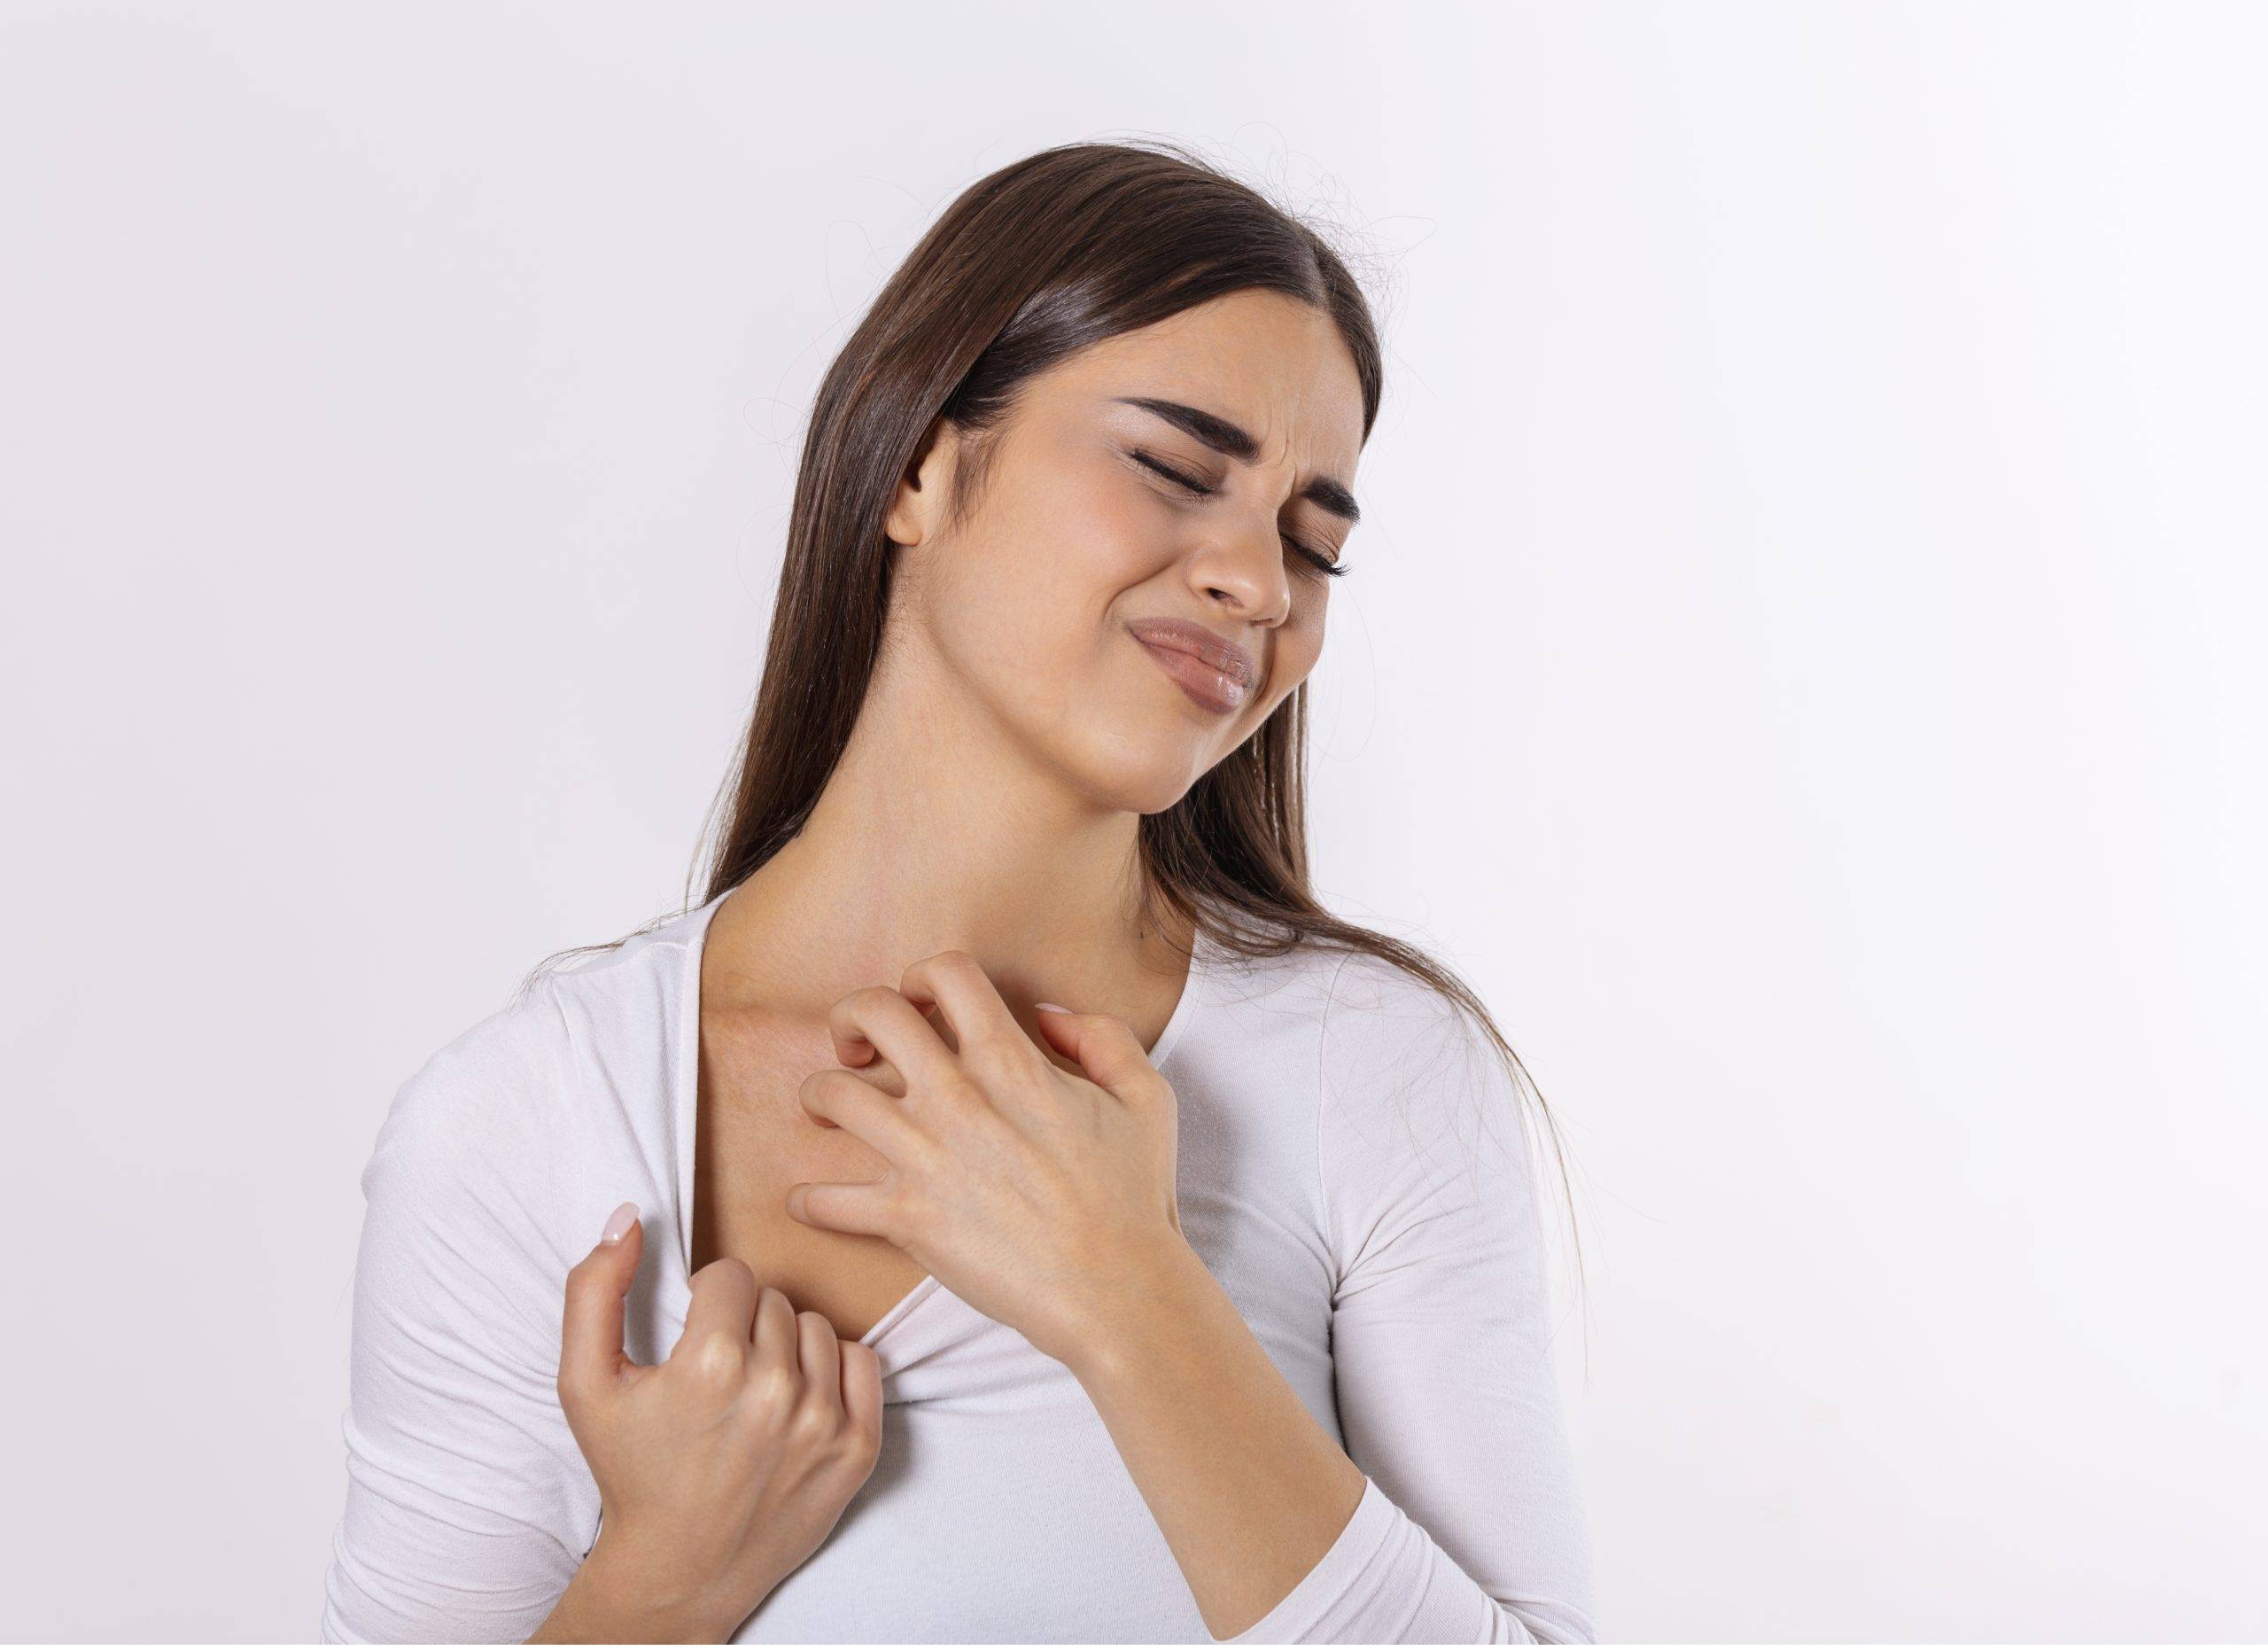 Young woman scratching her neck due to itching on a gray background. Female has an itching neck. The concept of allergy symptoms and healthcare